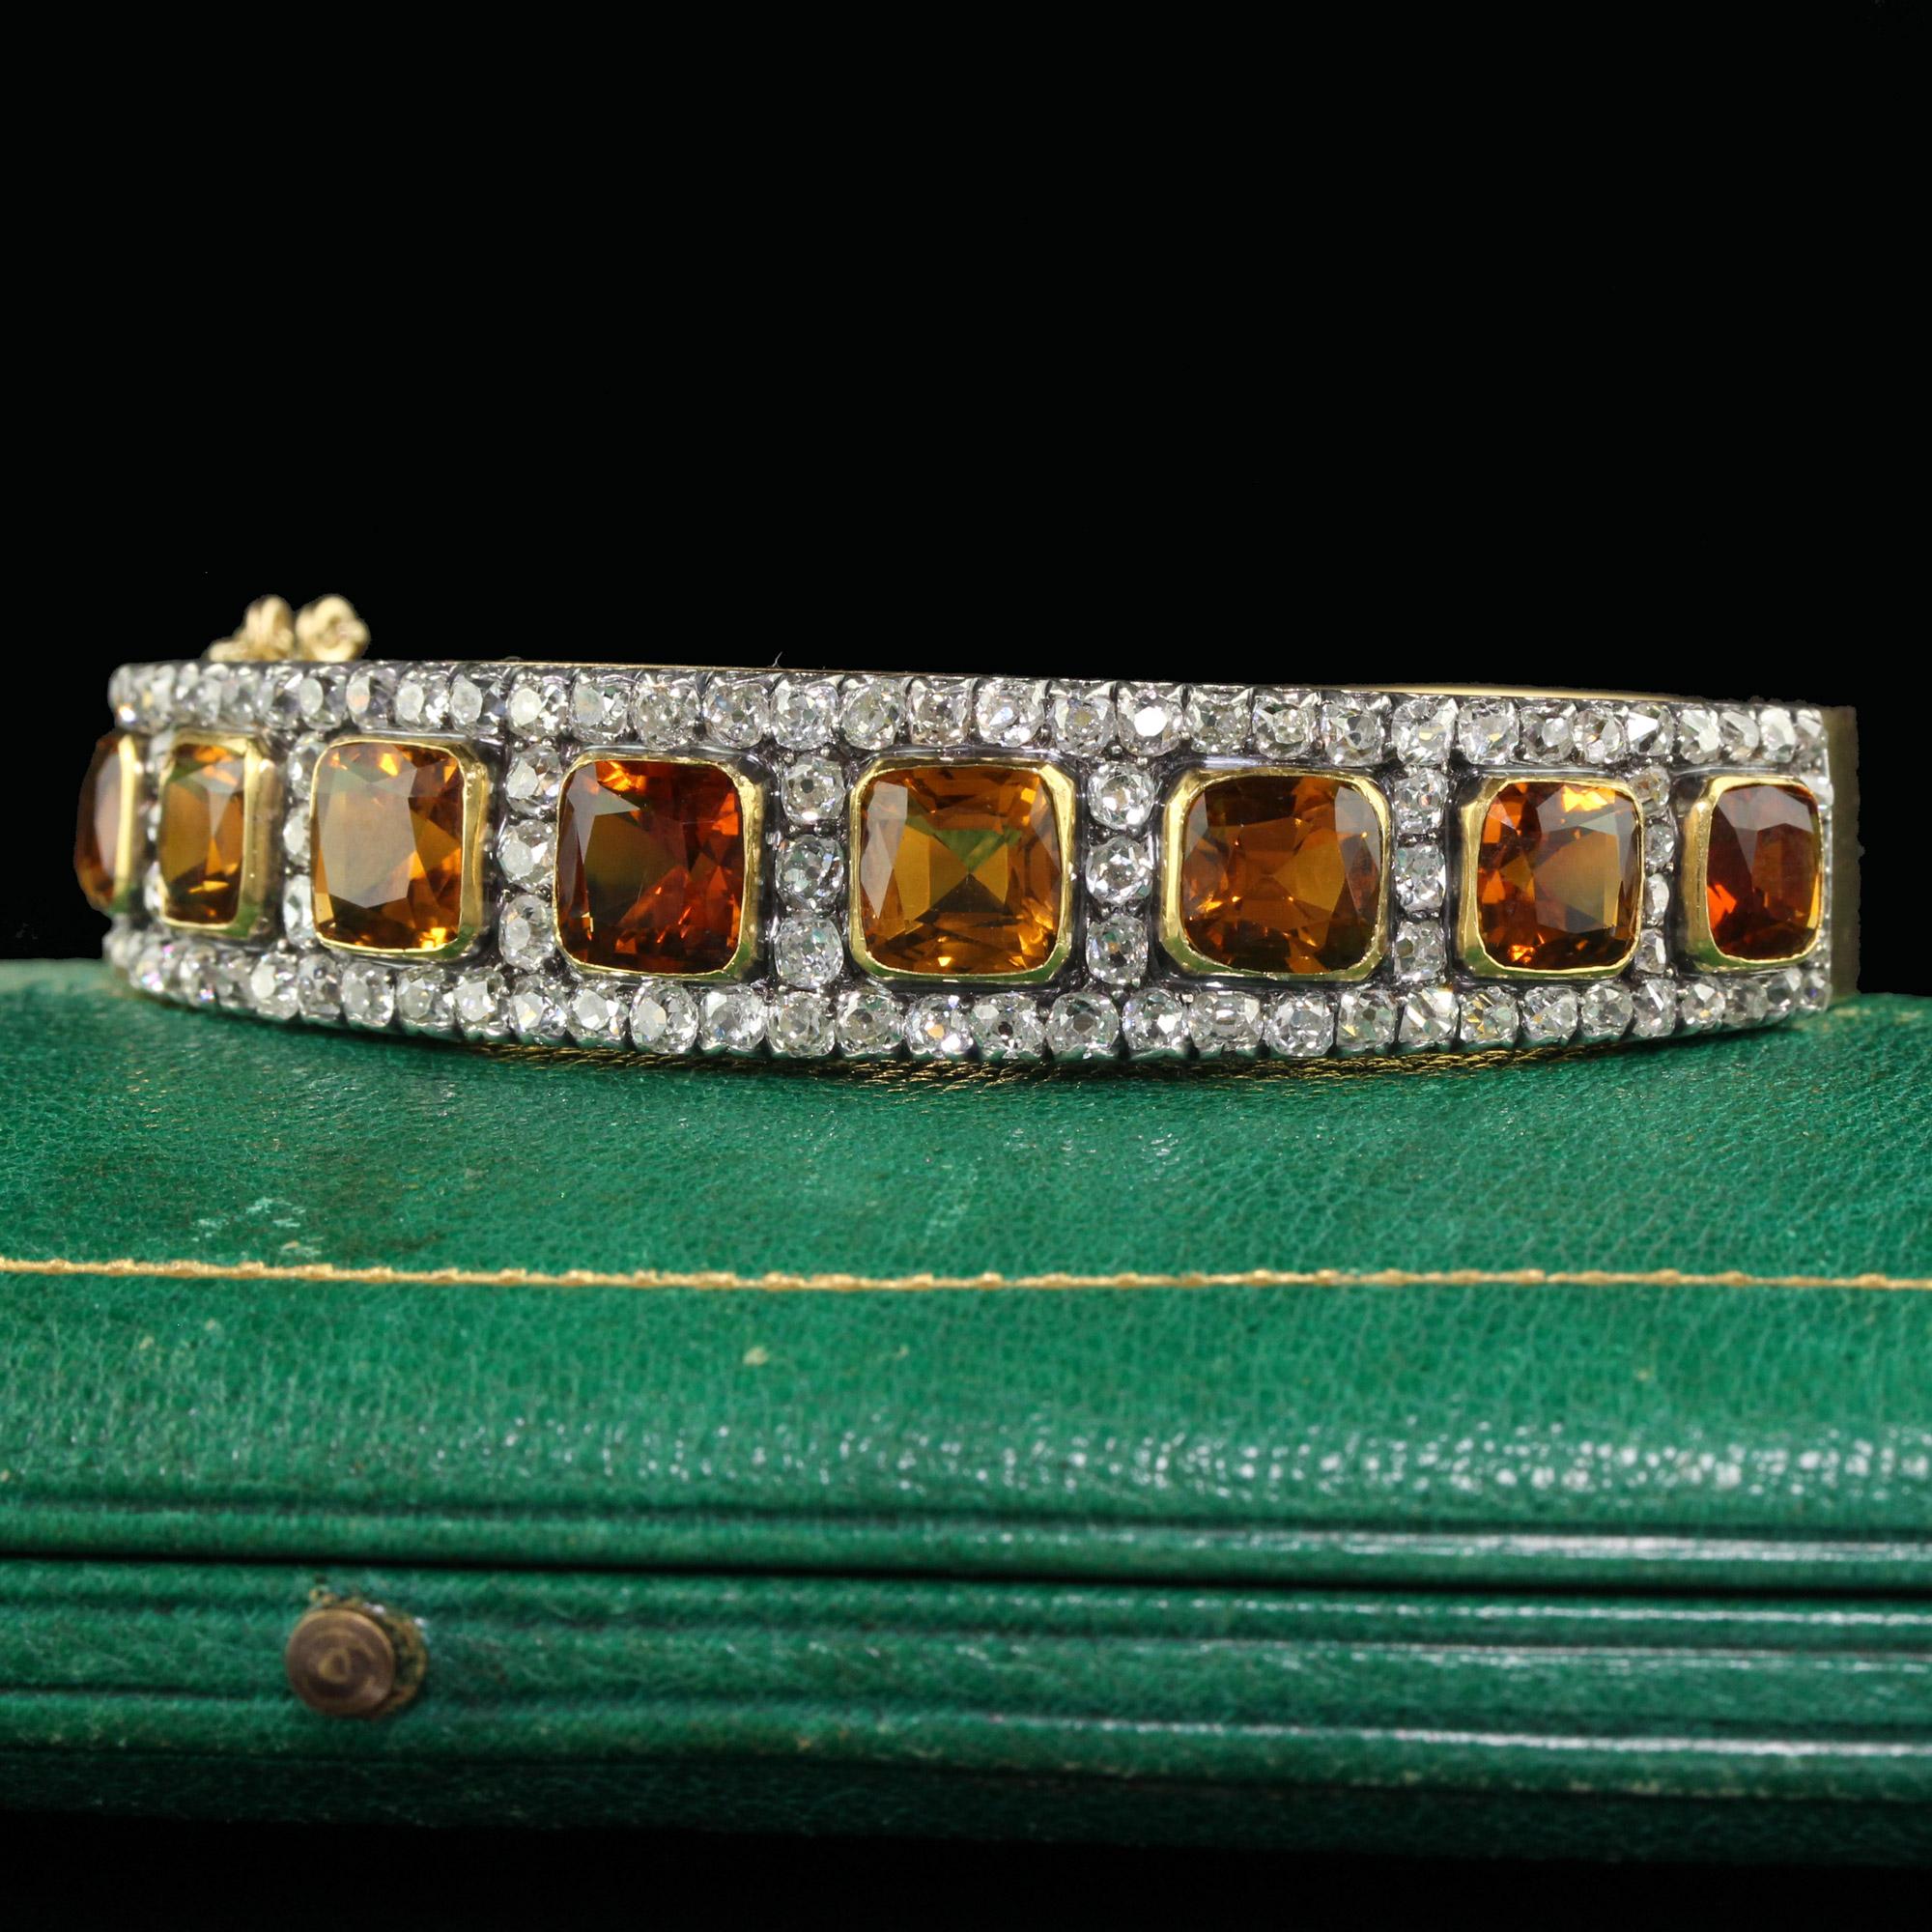 Beautiful Antique Victorian 18K Yellow Gold and Silver Old Mine Peruzzi Diamond and Citrine Bangle. This gorgeous bangle is crafted in 18k yellow gold and silver top. The top of the bangle has natural citrines and has rows of old mine cut diamonds